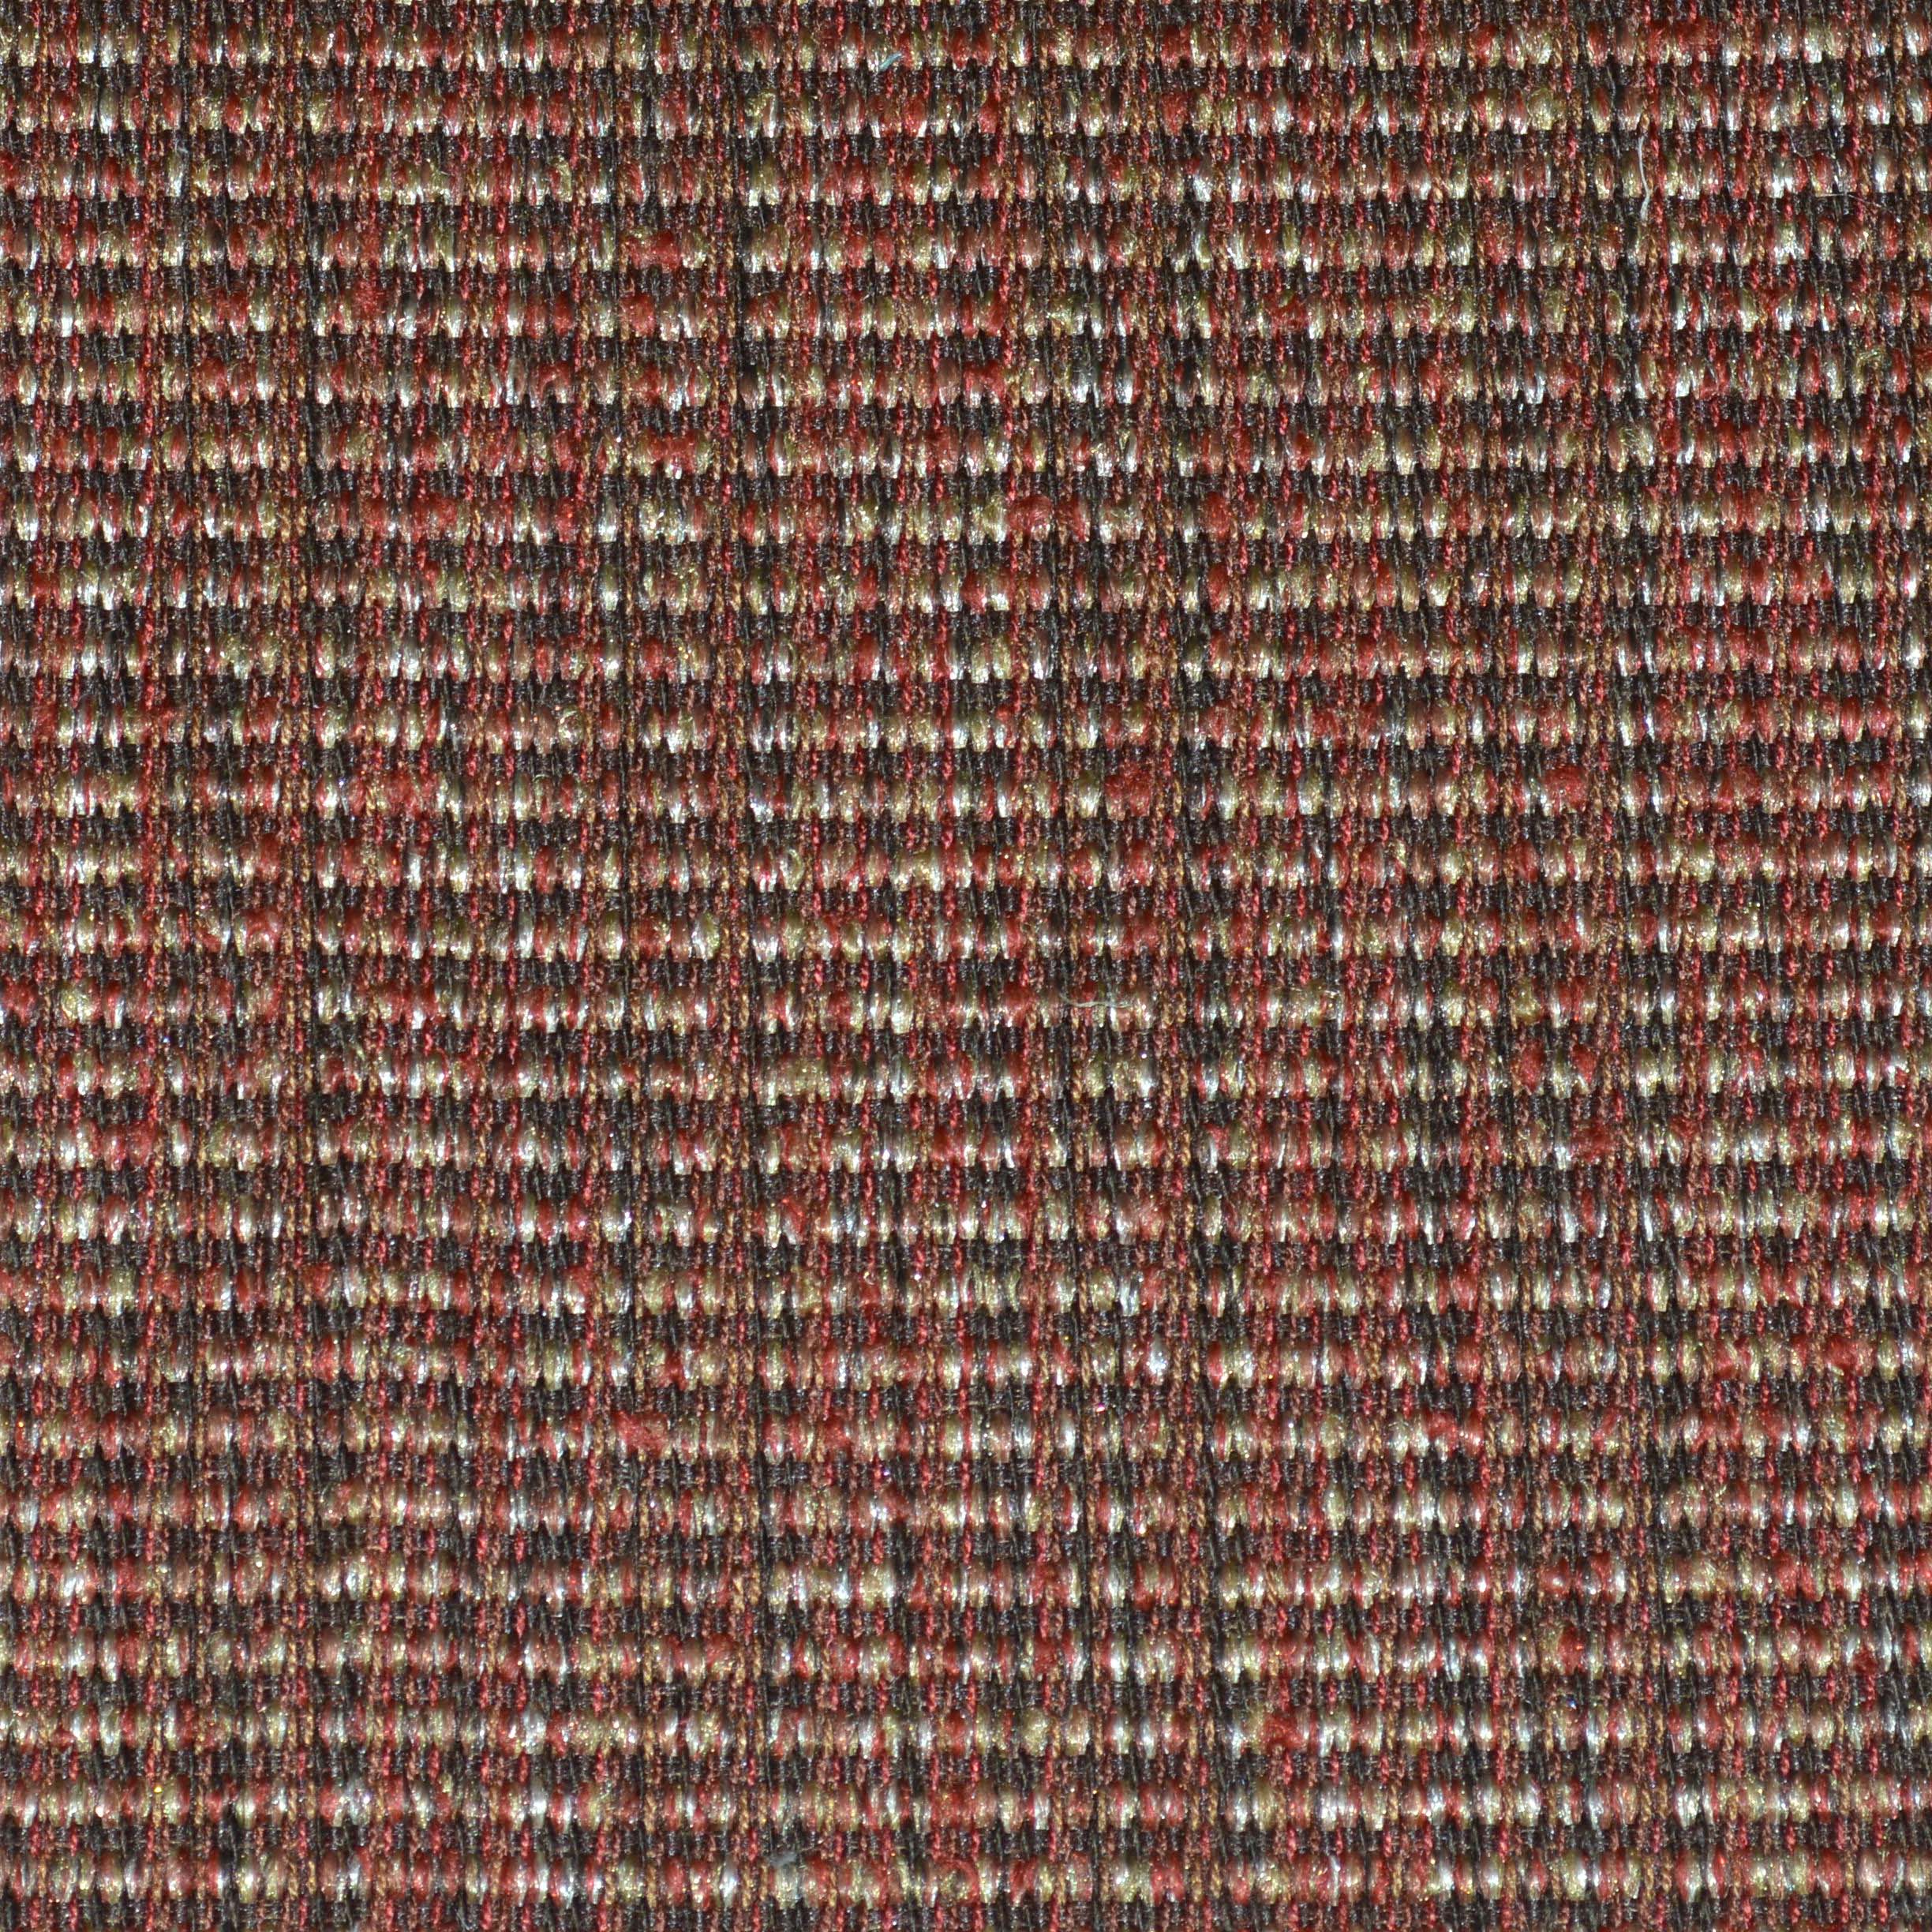 Dunroven House - Fabric Swatch